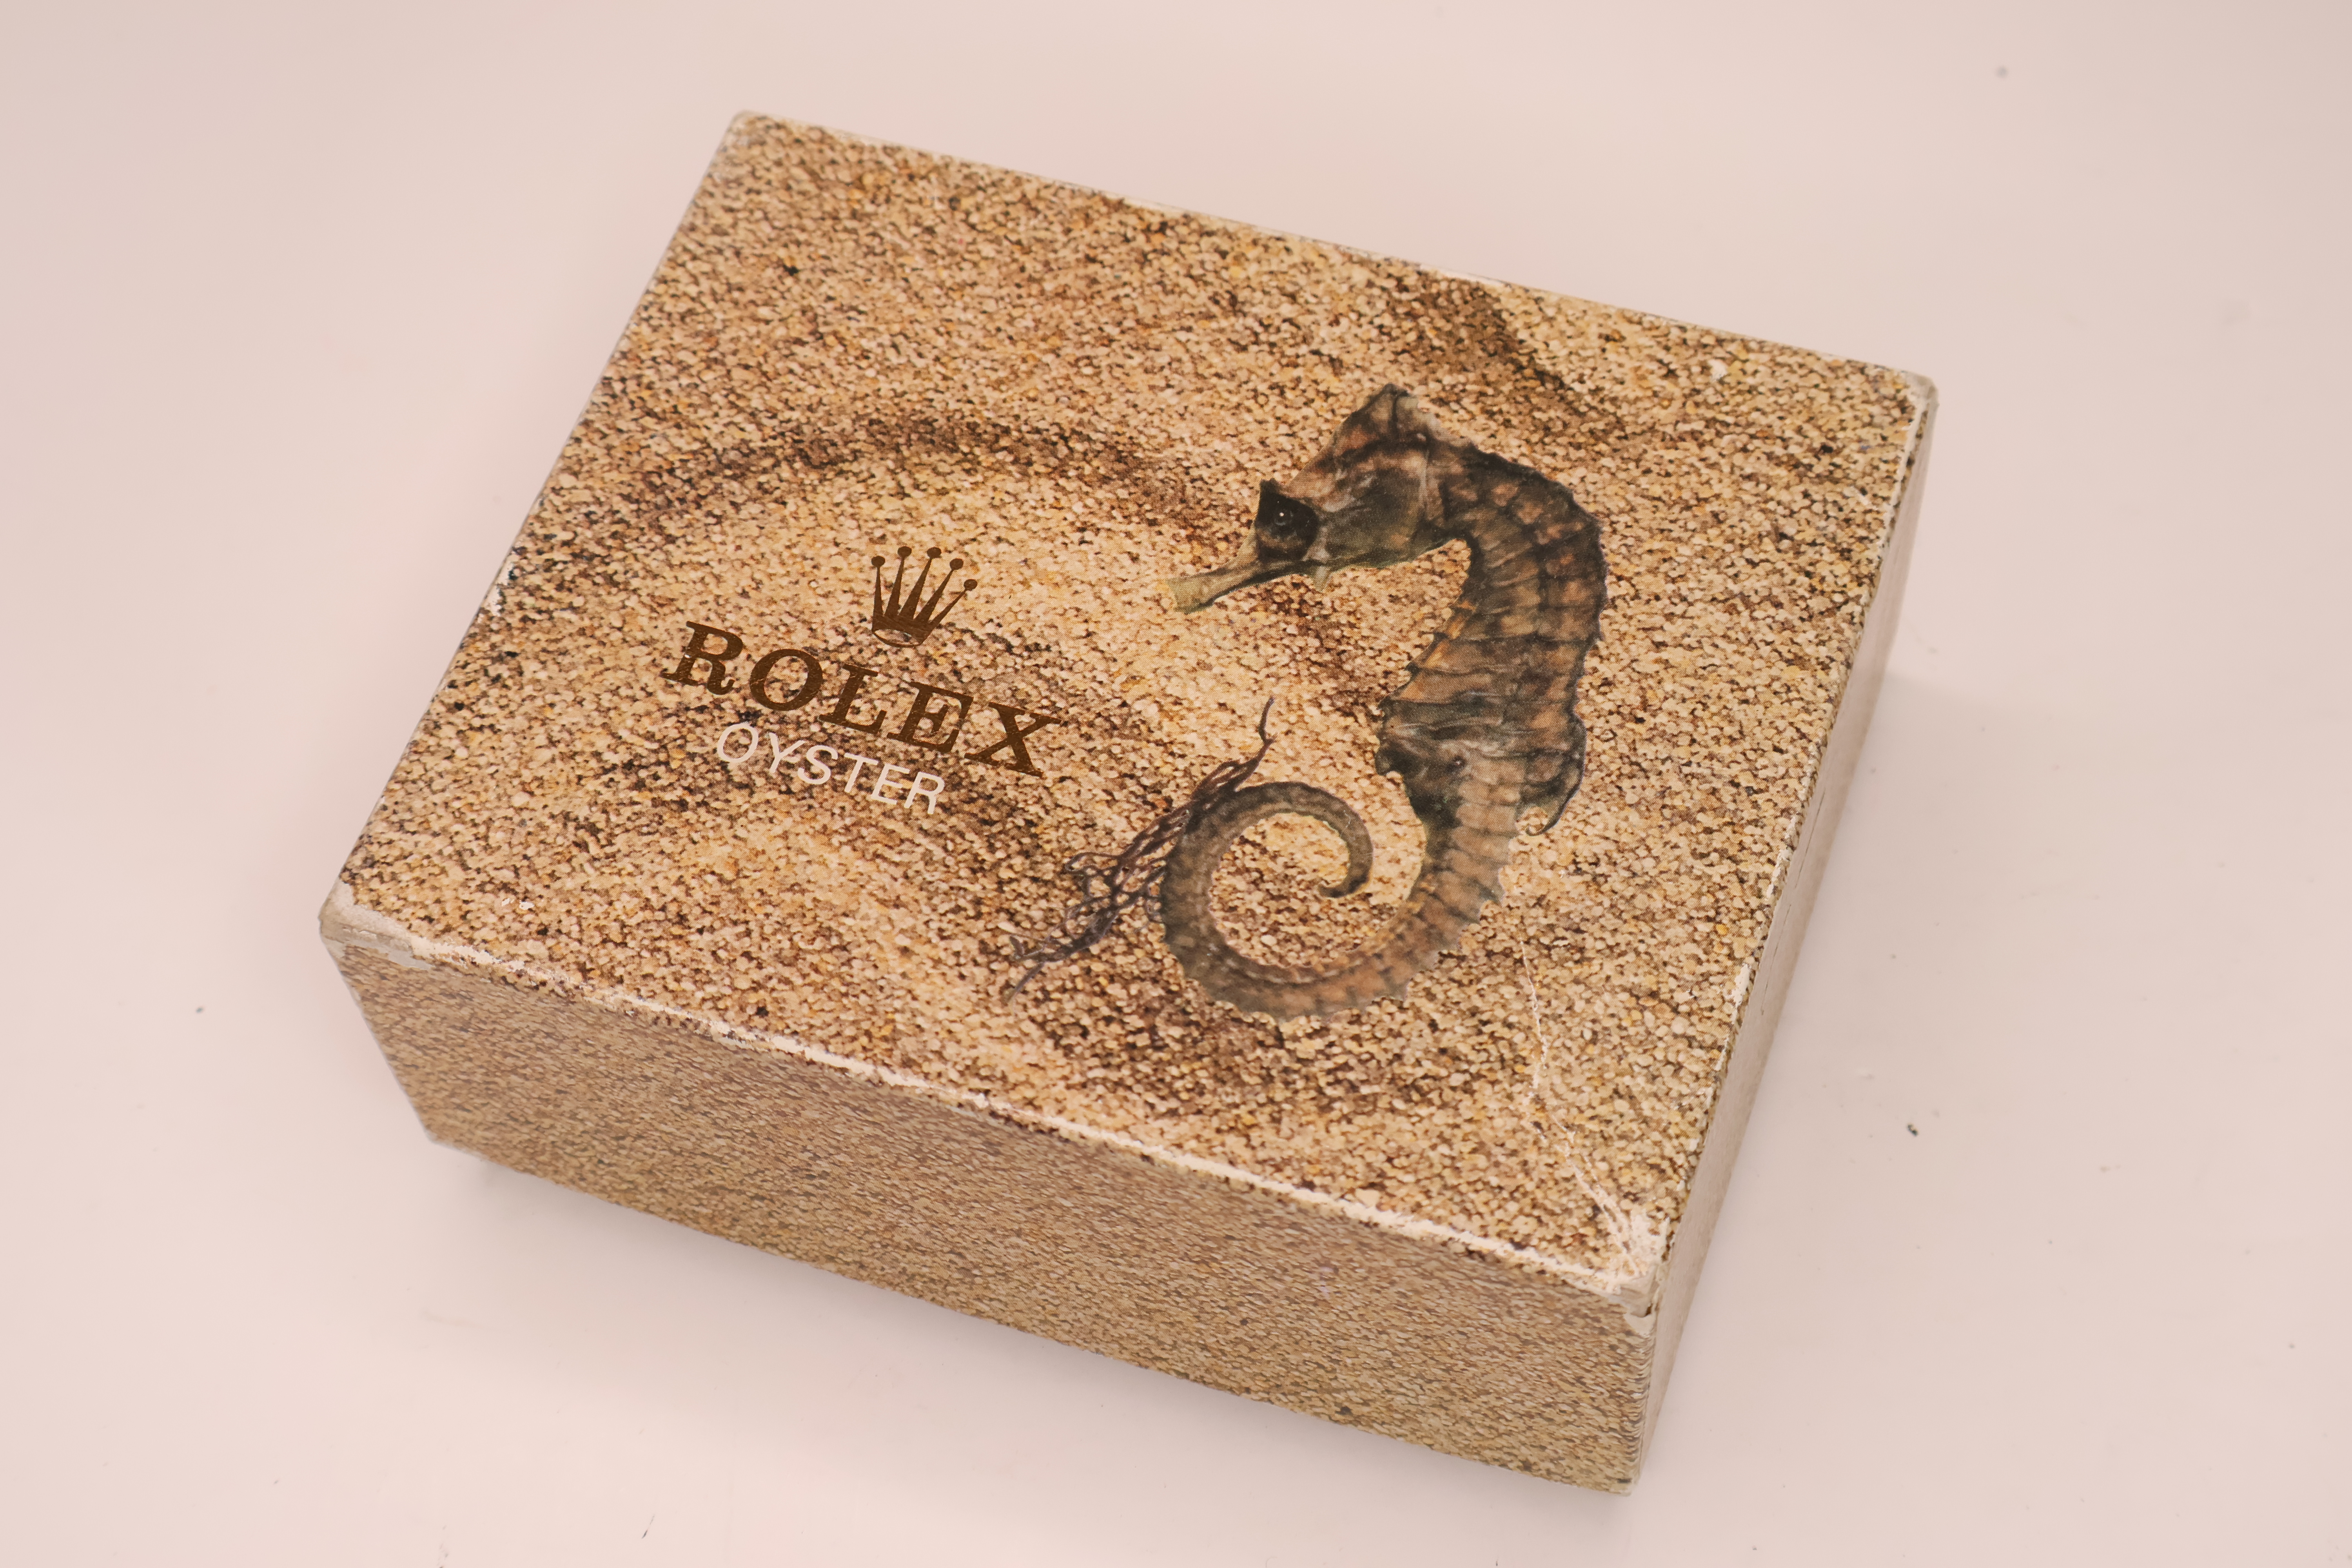 *To Be Sold Without Reserve* Rolex Rare Seahorse Outer Box - Image 2 of 2